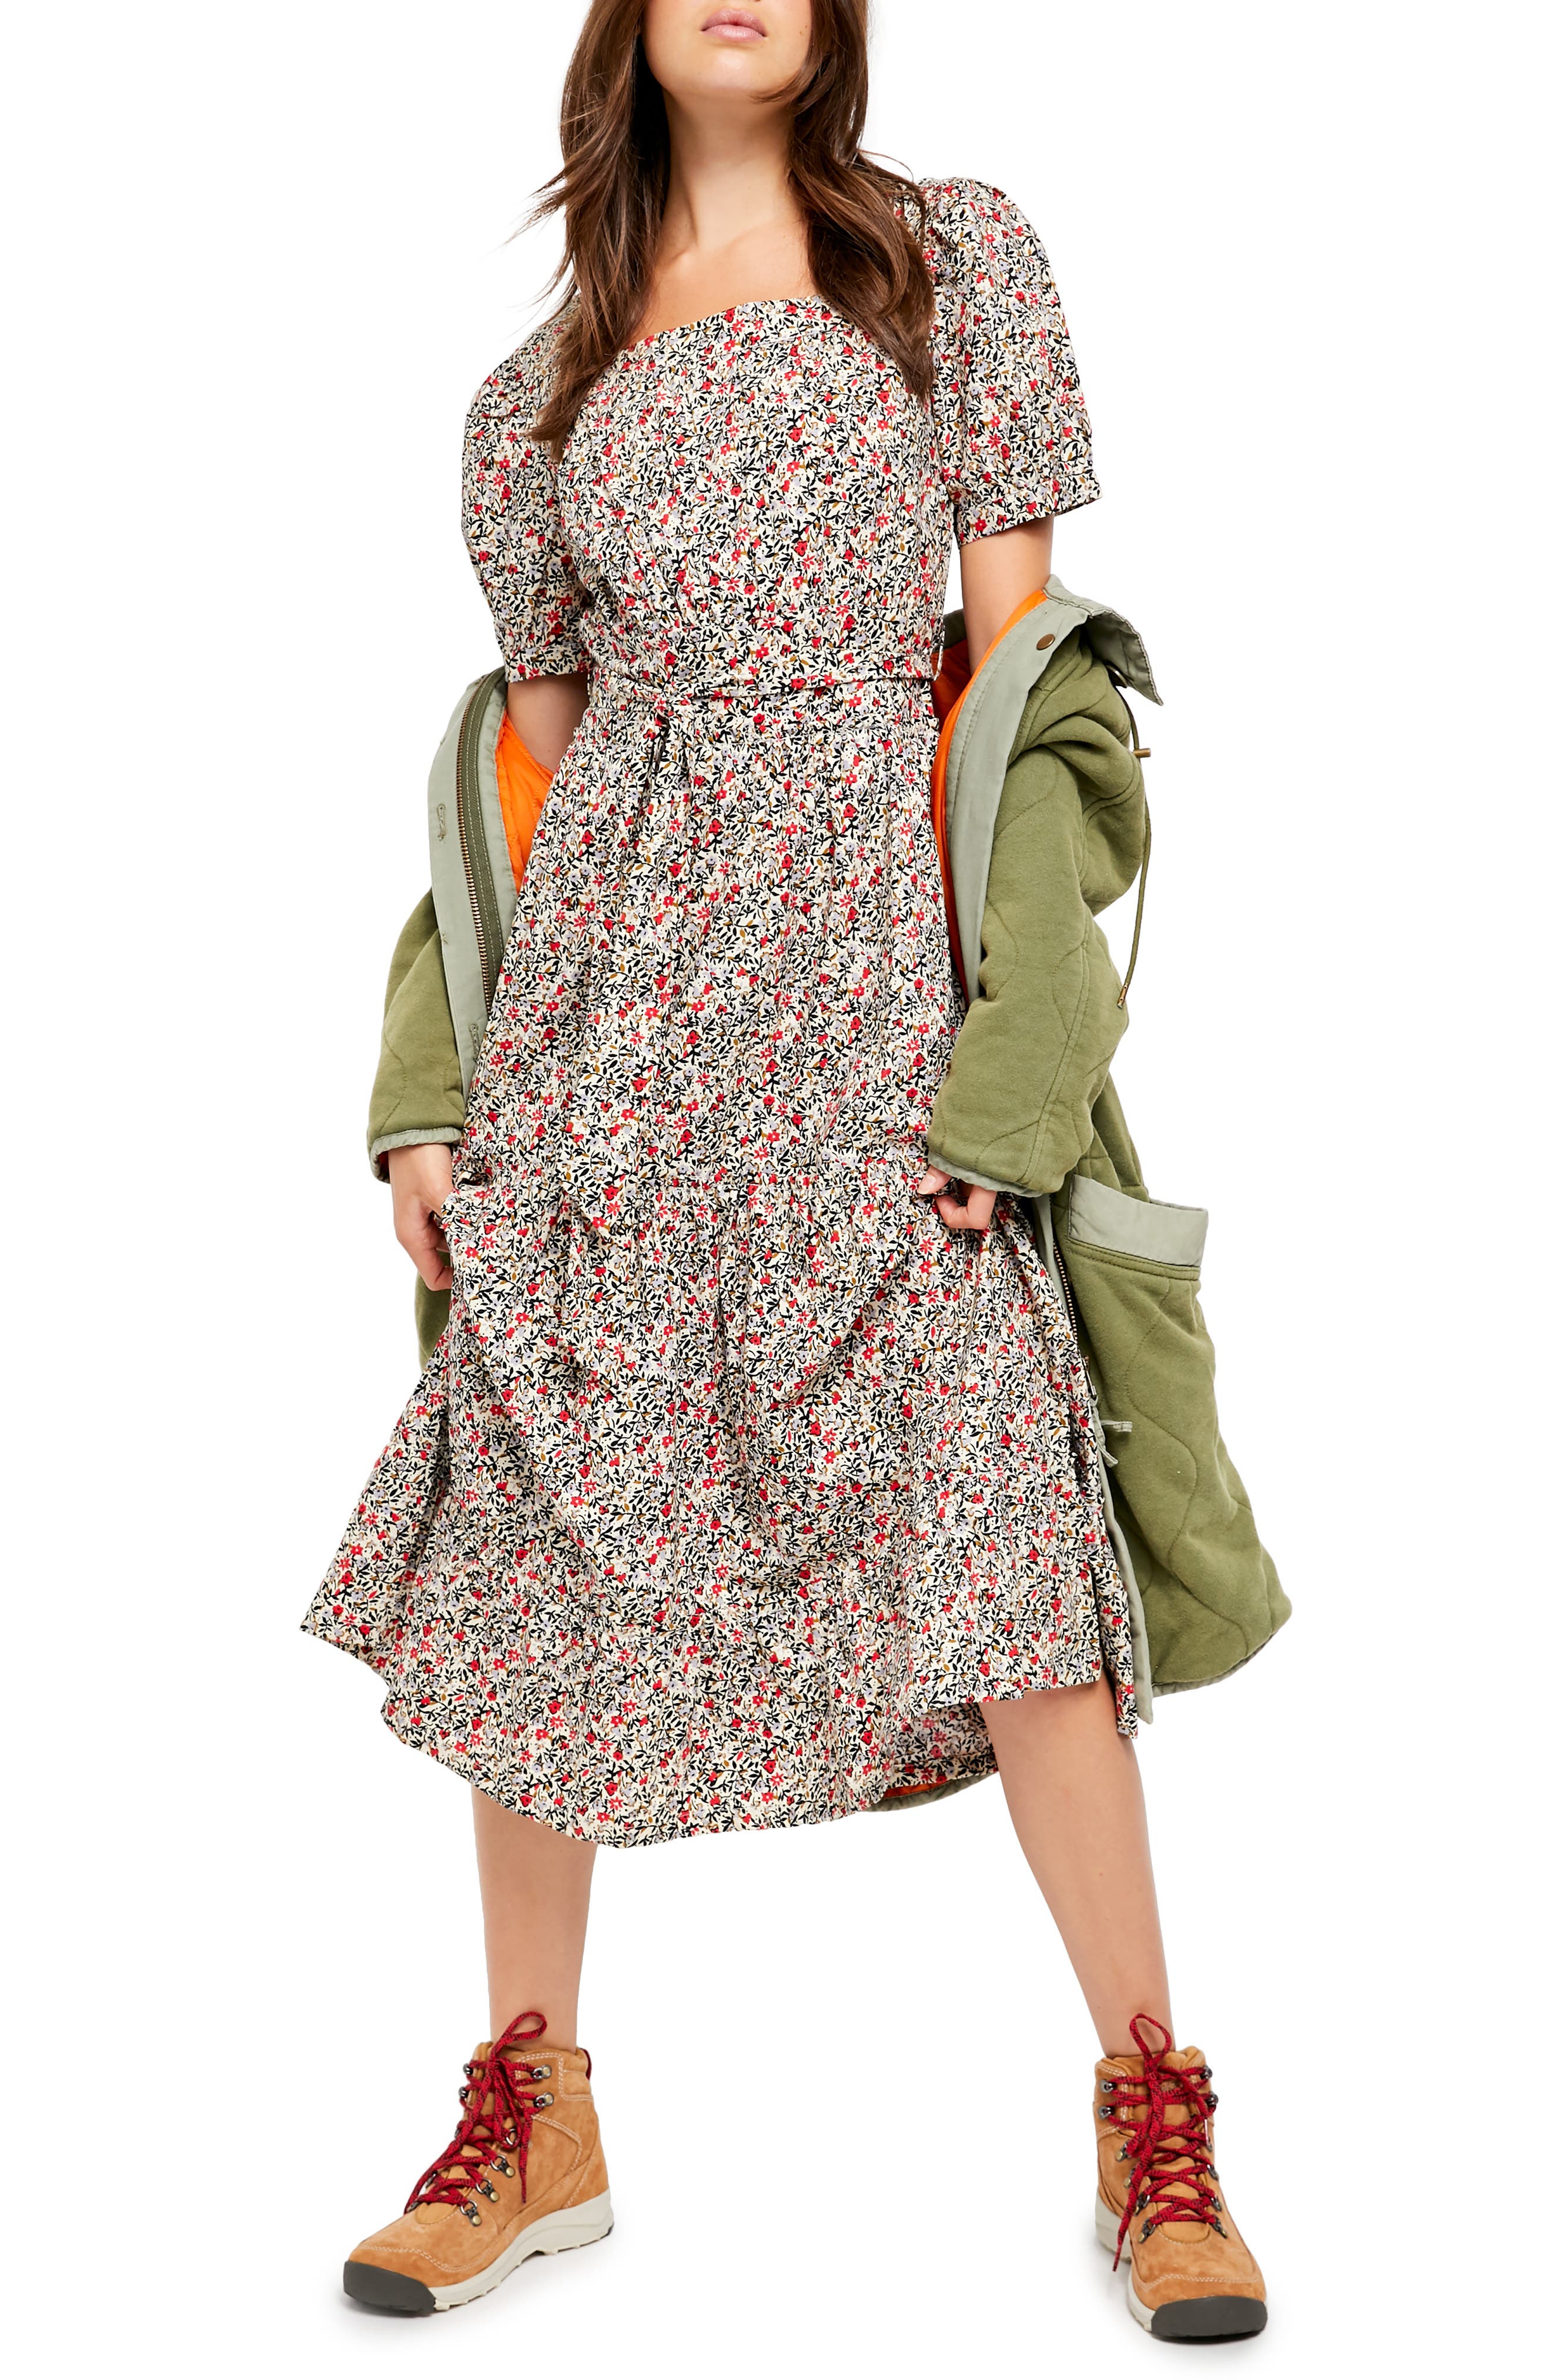 Get In on the Prairie Dress Trend This Winter If You Hate Wearing